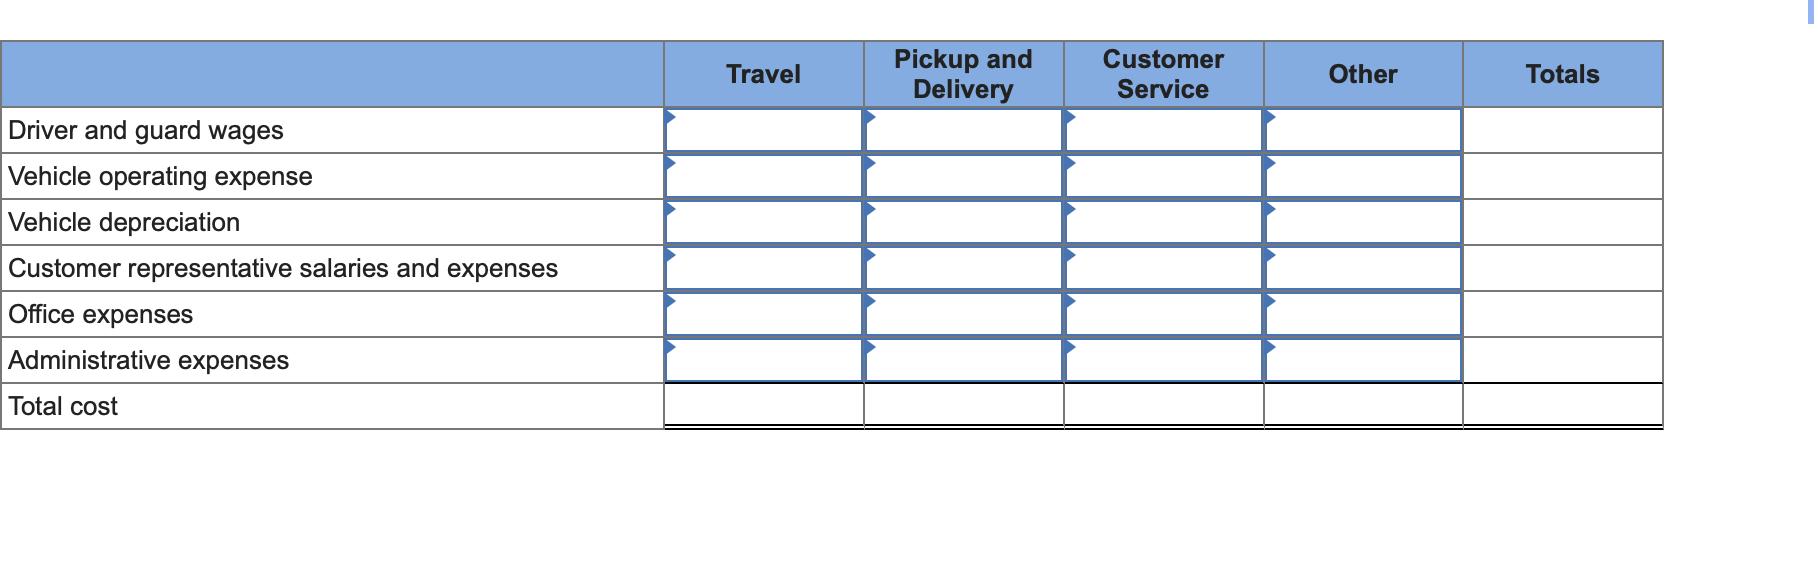 begin{tabular}{|l|l|l|l|l|l|l|l|l|l|} hline & & Travel & Pickup and Delivery & Customer Service & & Other  hline Driver